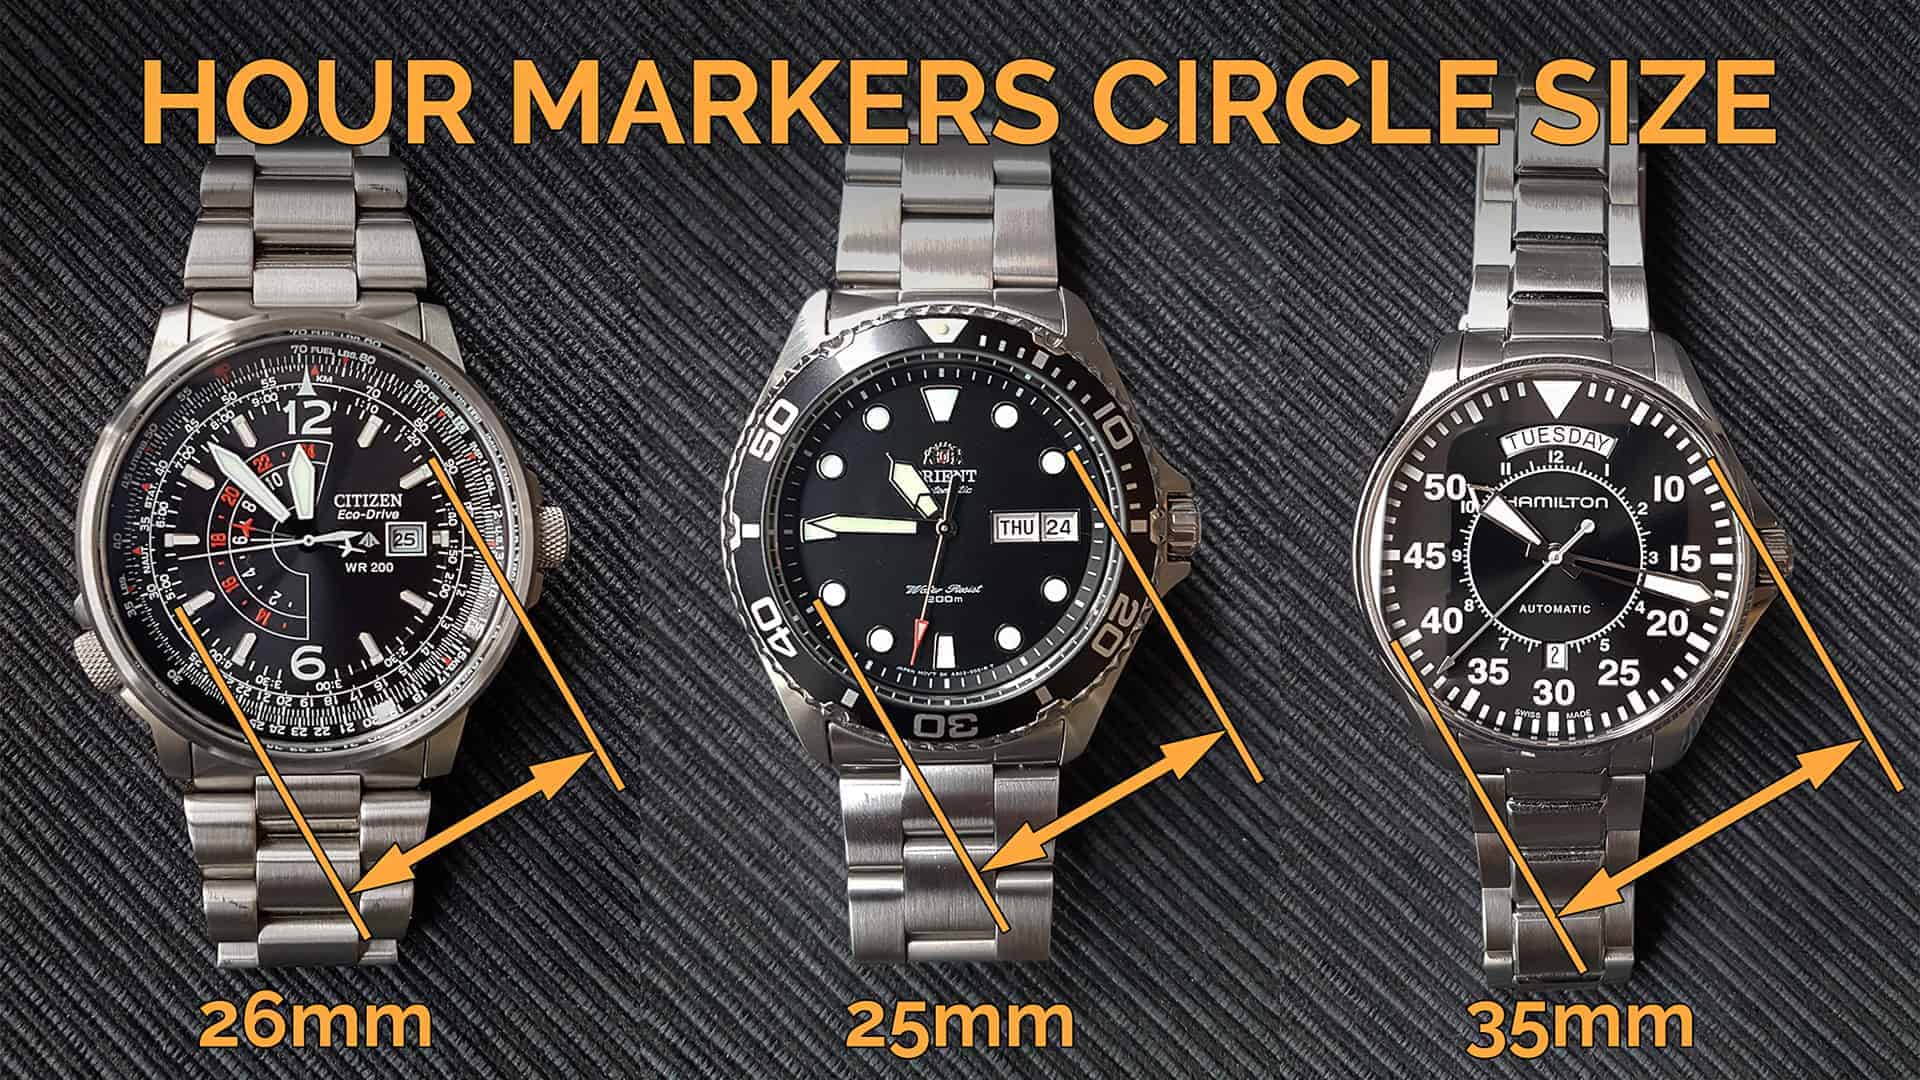 The ULTIMATE Watch Size Guide [COMPLETE] • The Slender Wrist